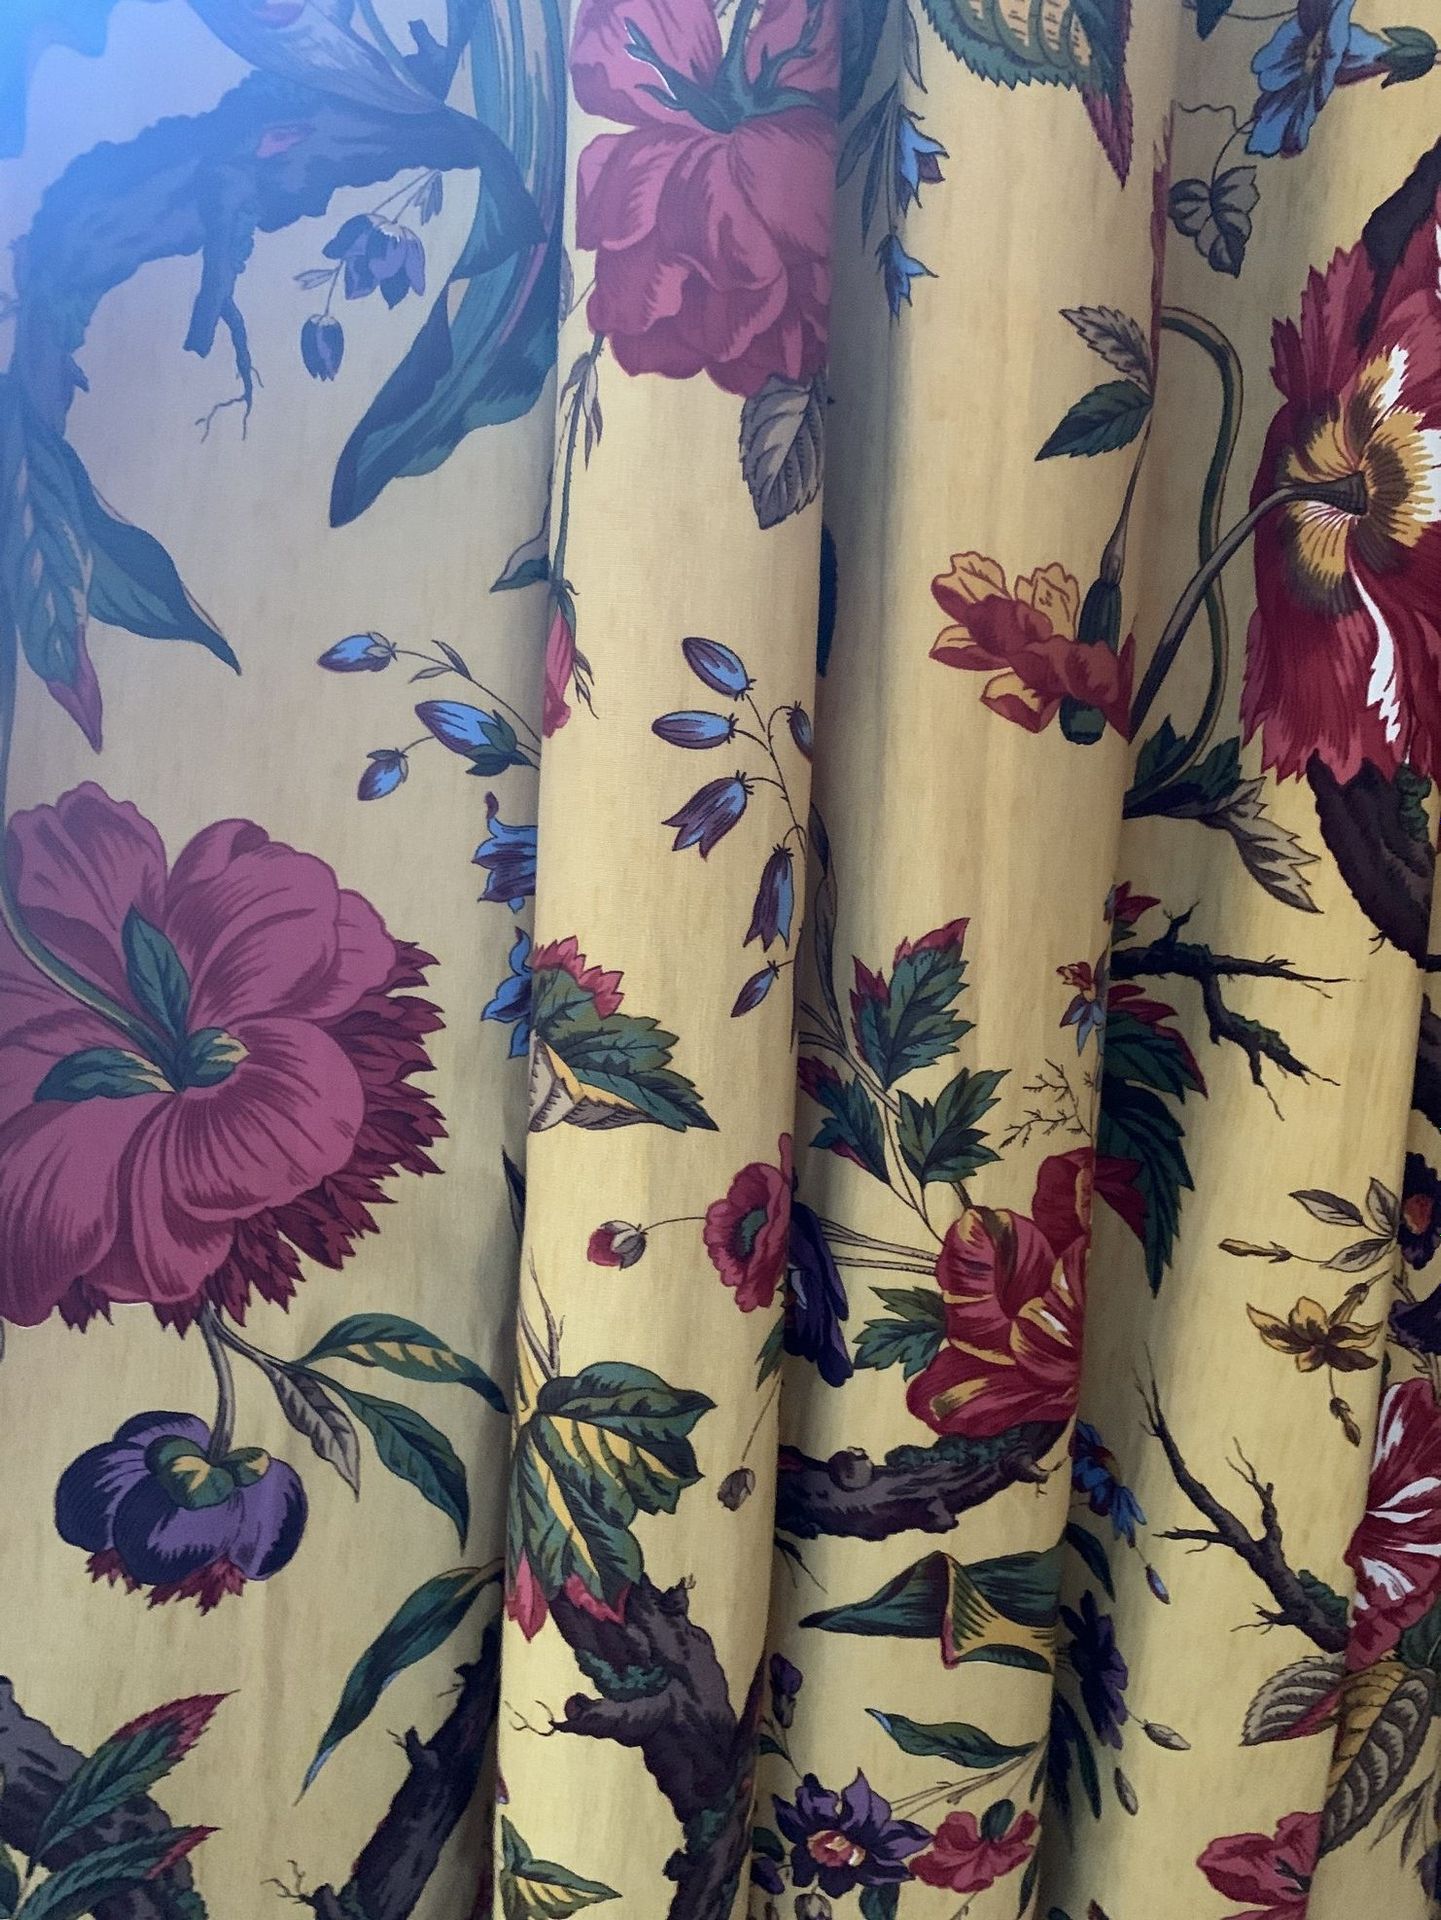 Null 5 pairs of curtains.X000D_

SALE WITHOUT CATALOG. FOR SALE AT BEST - NO RES&hellip;